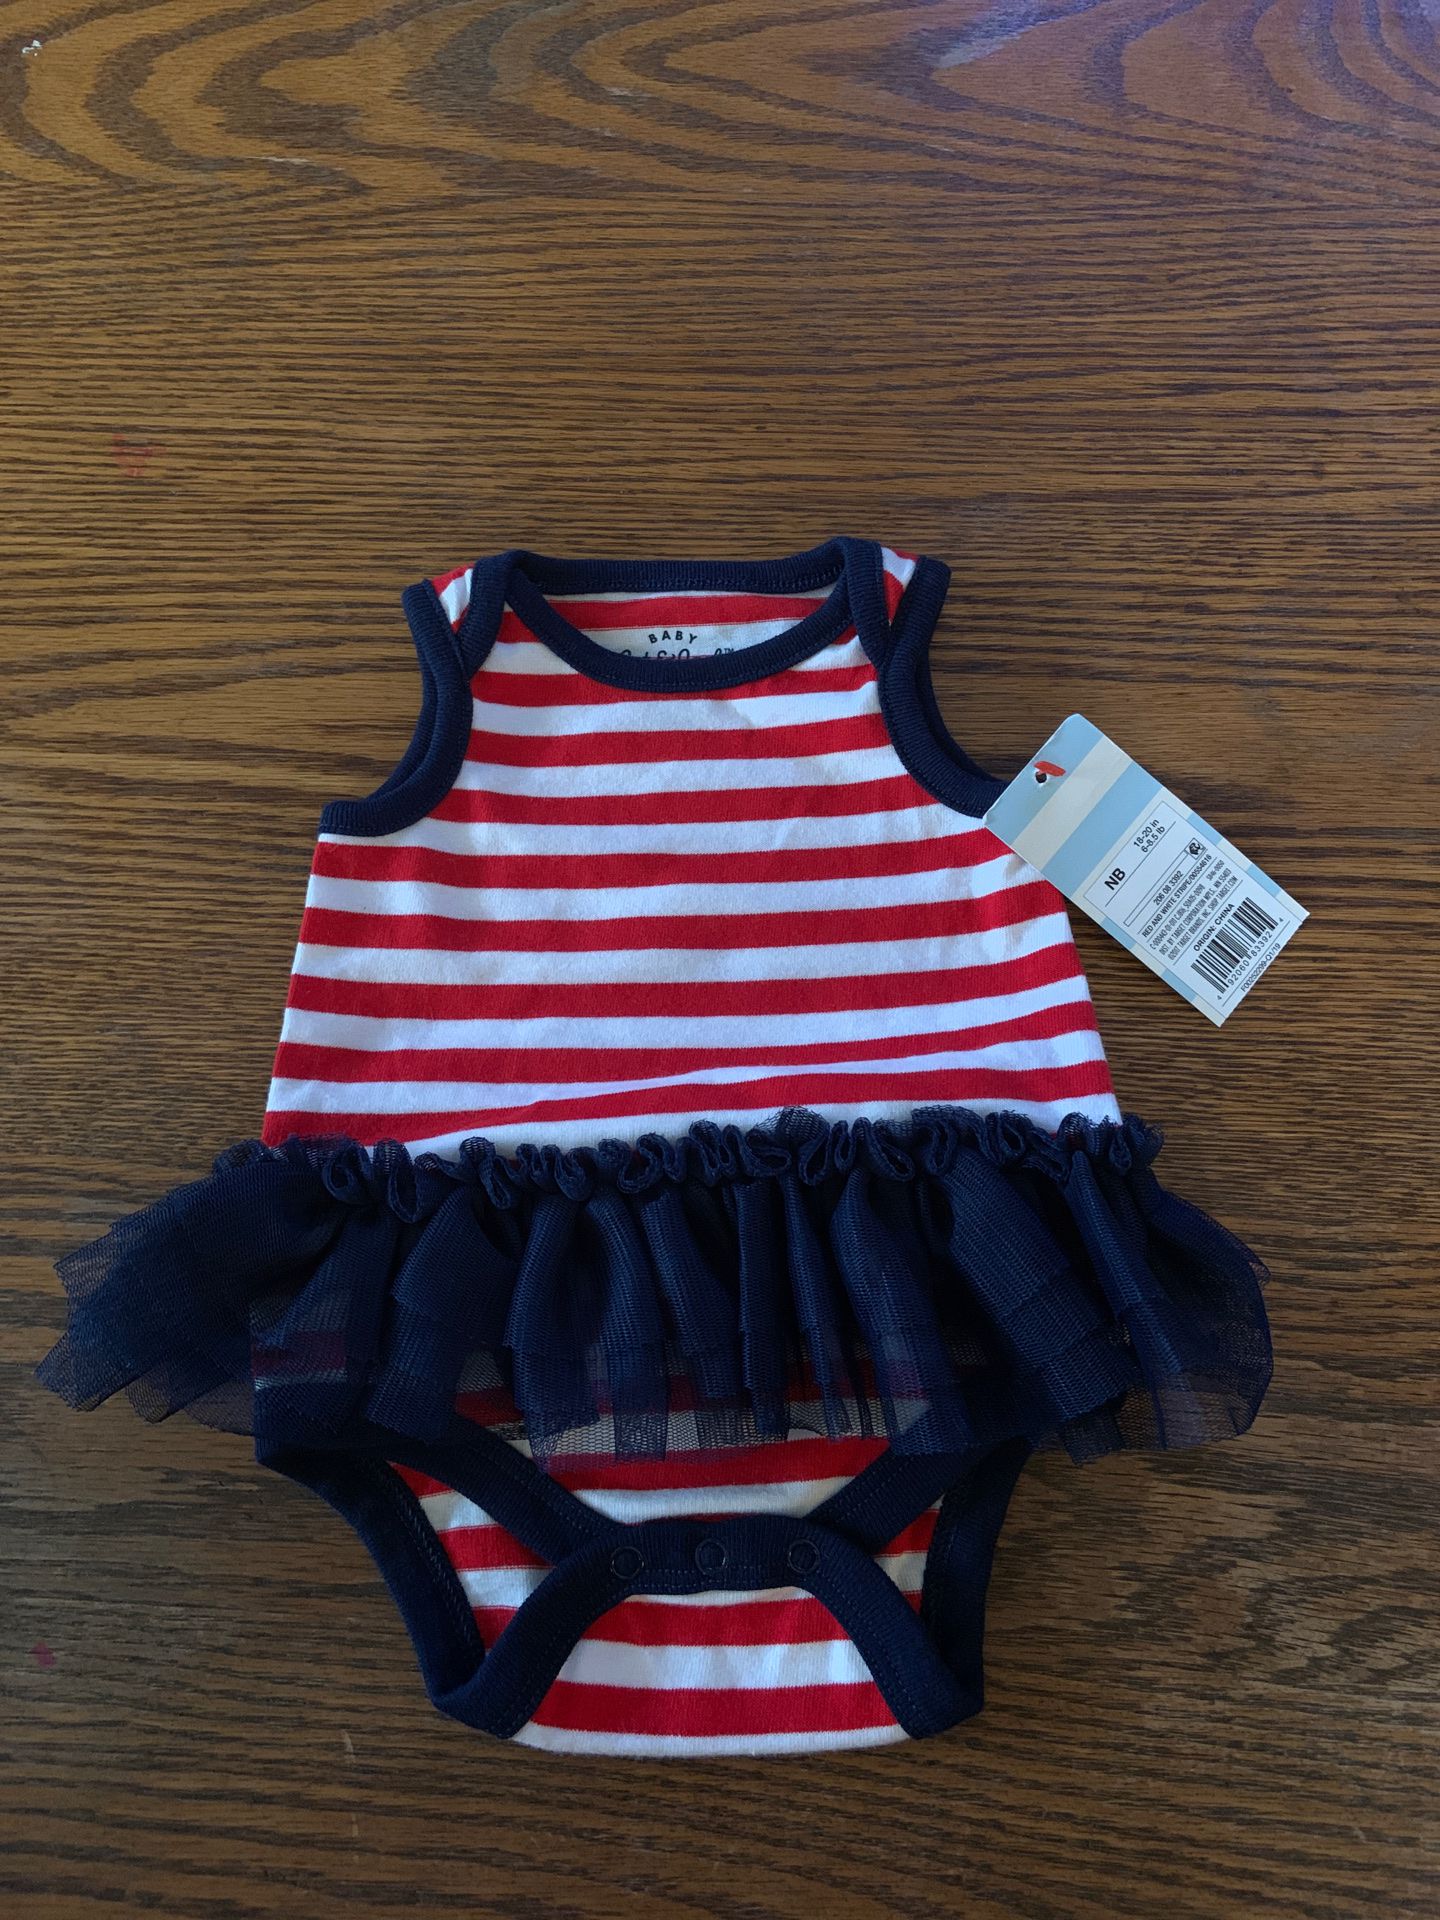 Brand New! Baby Girl 4th of July outfit, Newborn size